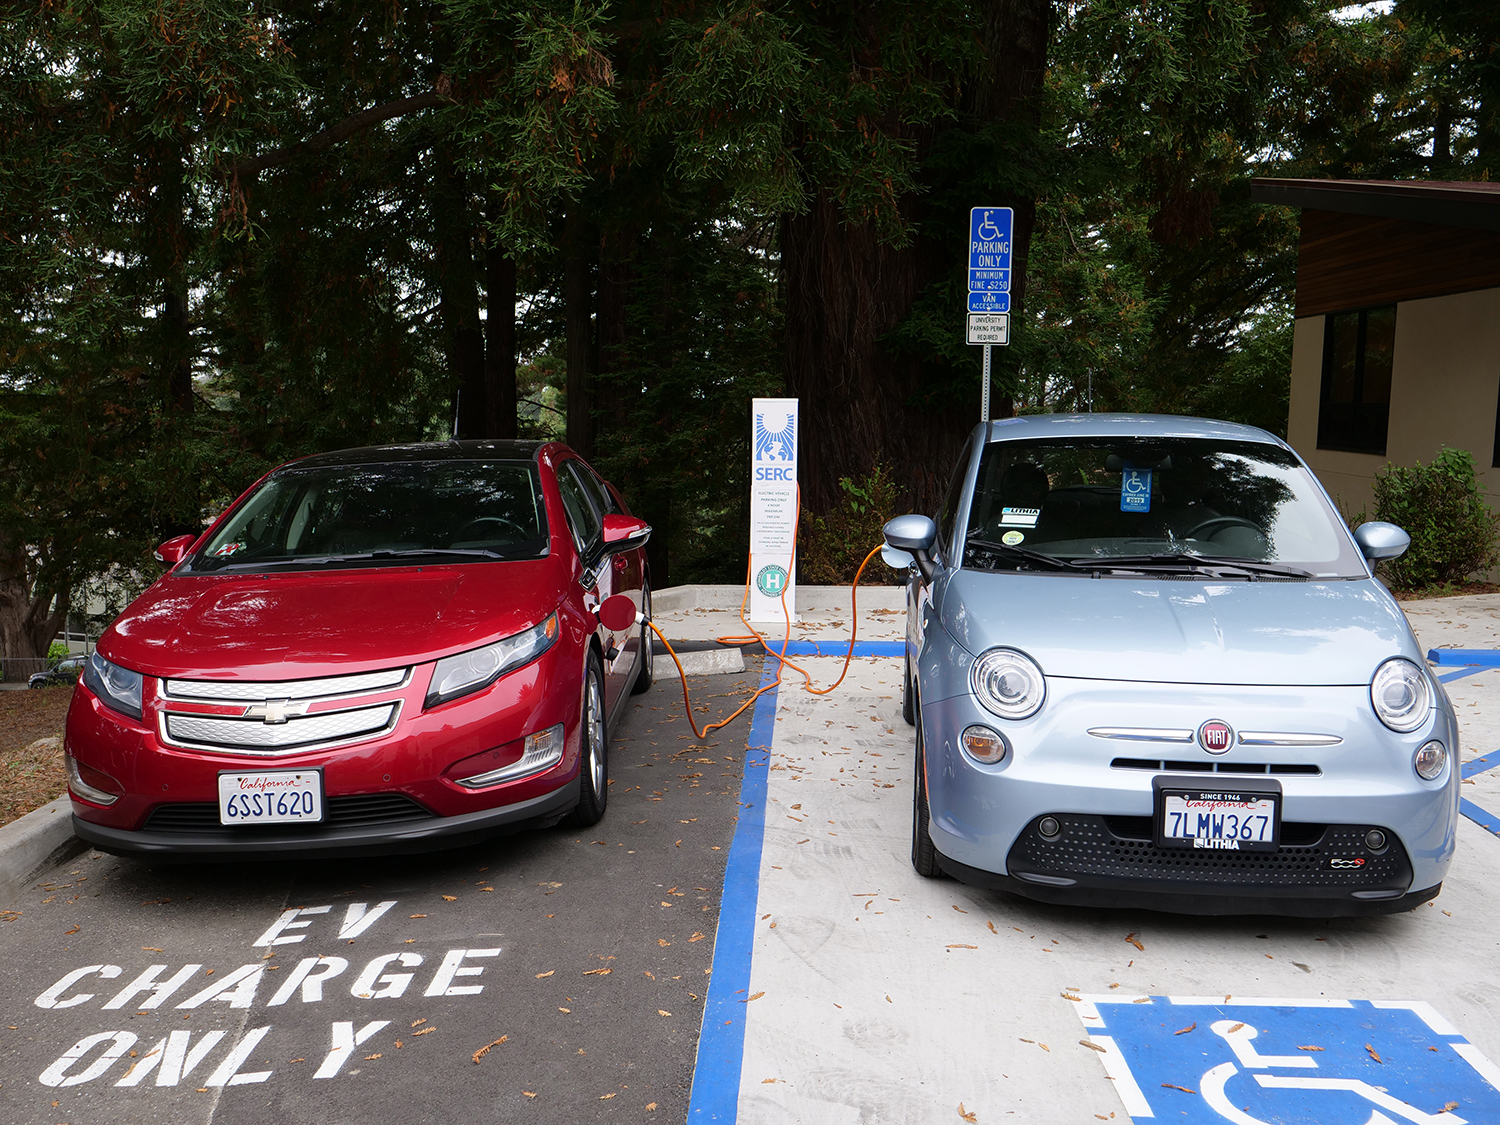 Two cars, with the fuel lines crossing over each other, charge beneath redwoods